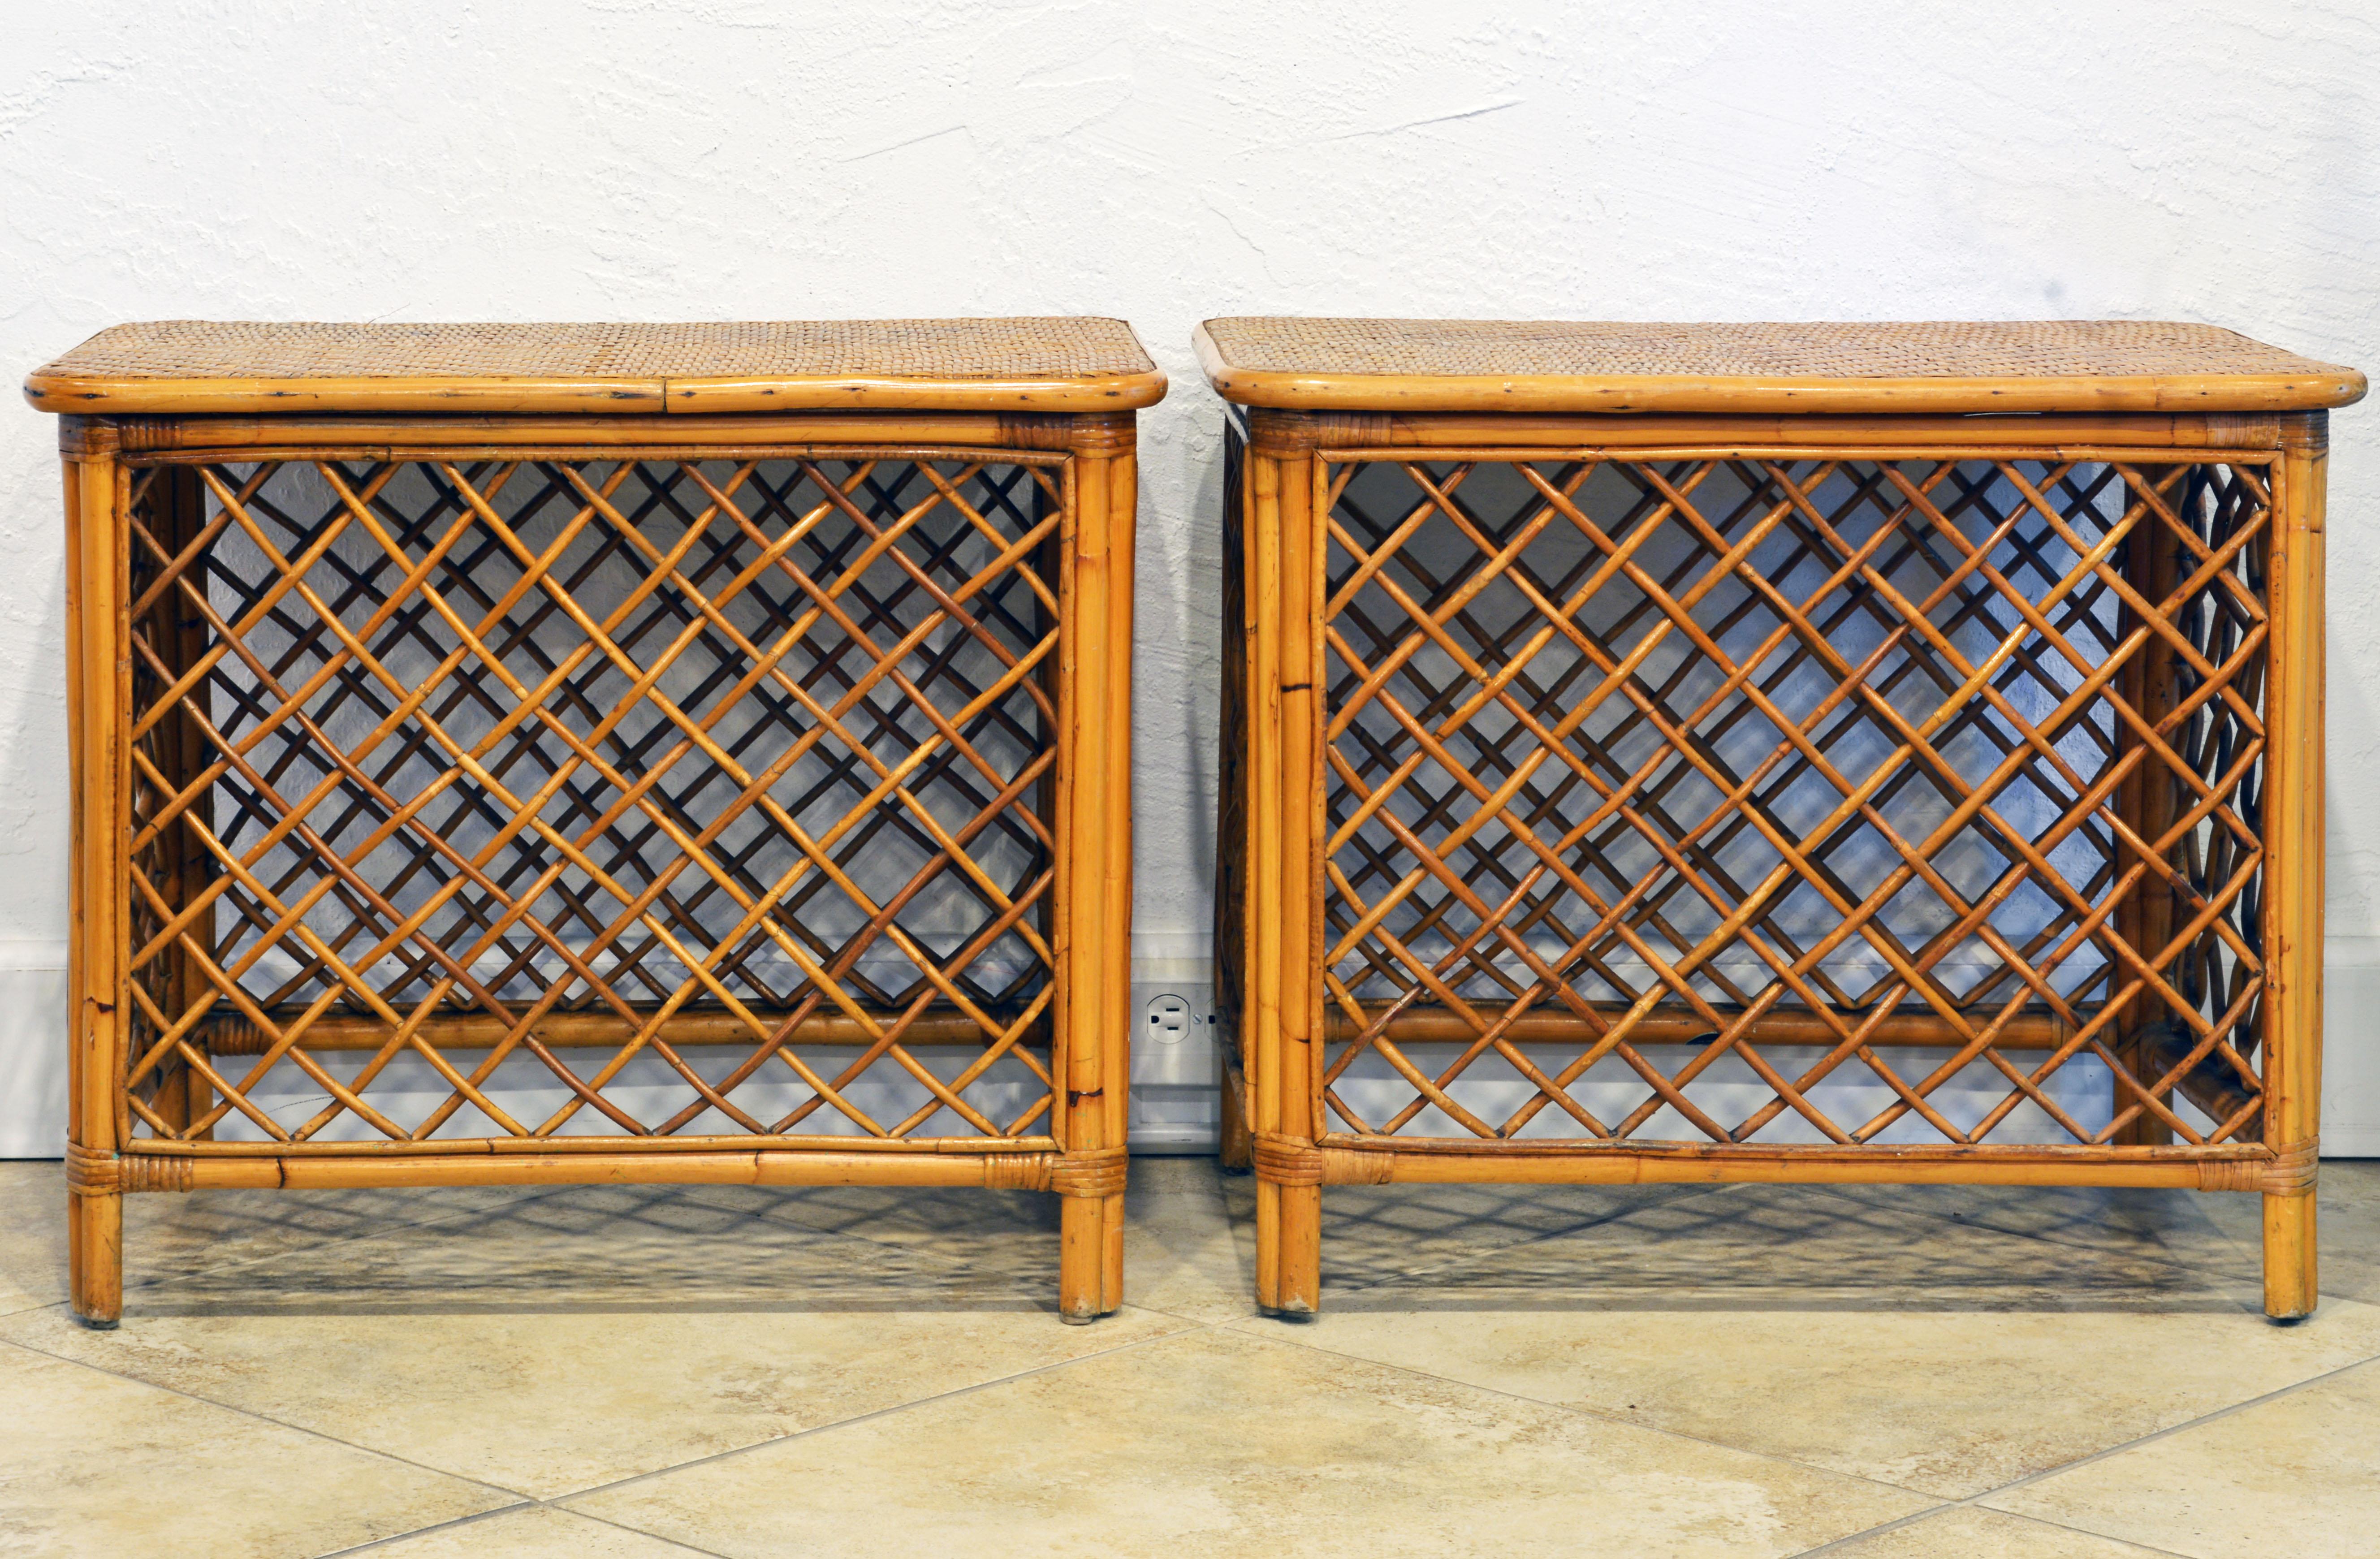 Spanish Colonial Pair of Plantation Style Rattan Side Tables by Artesania, Dominican Republic